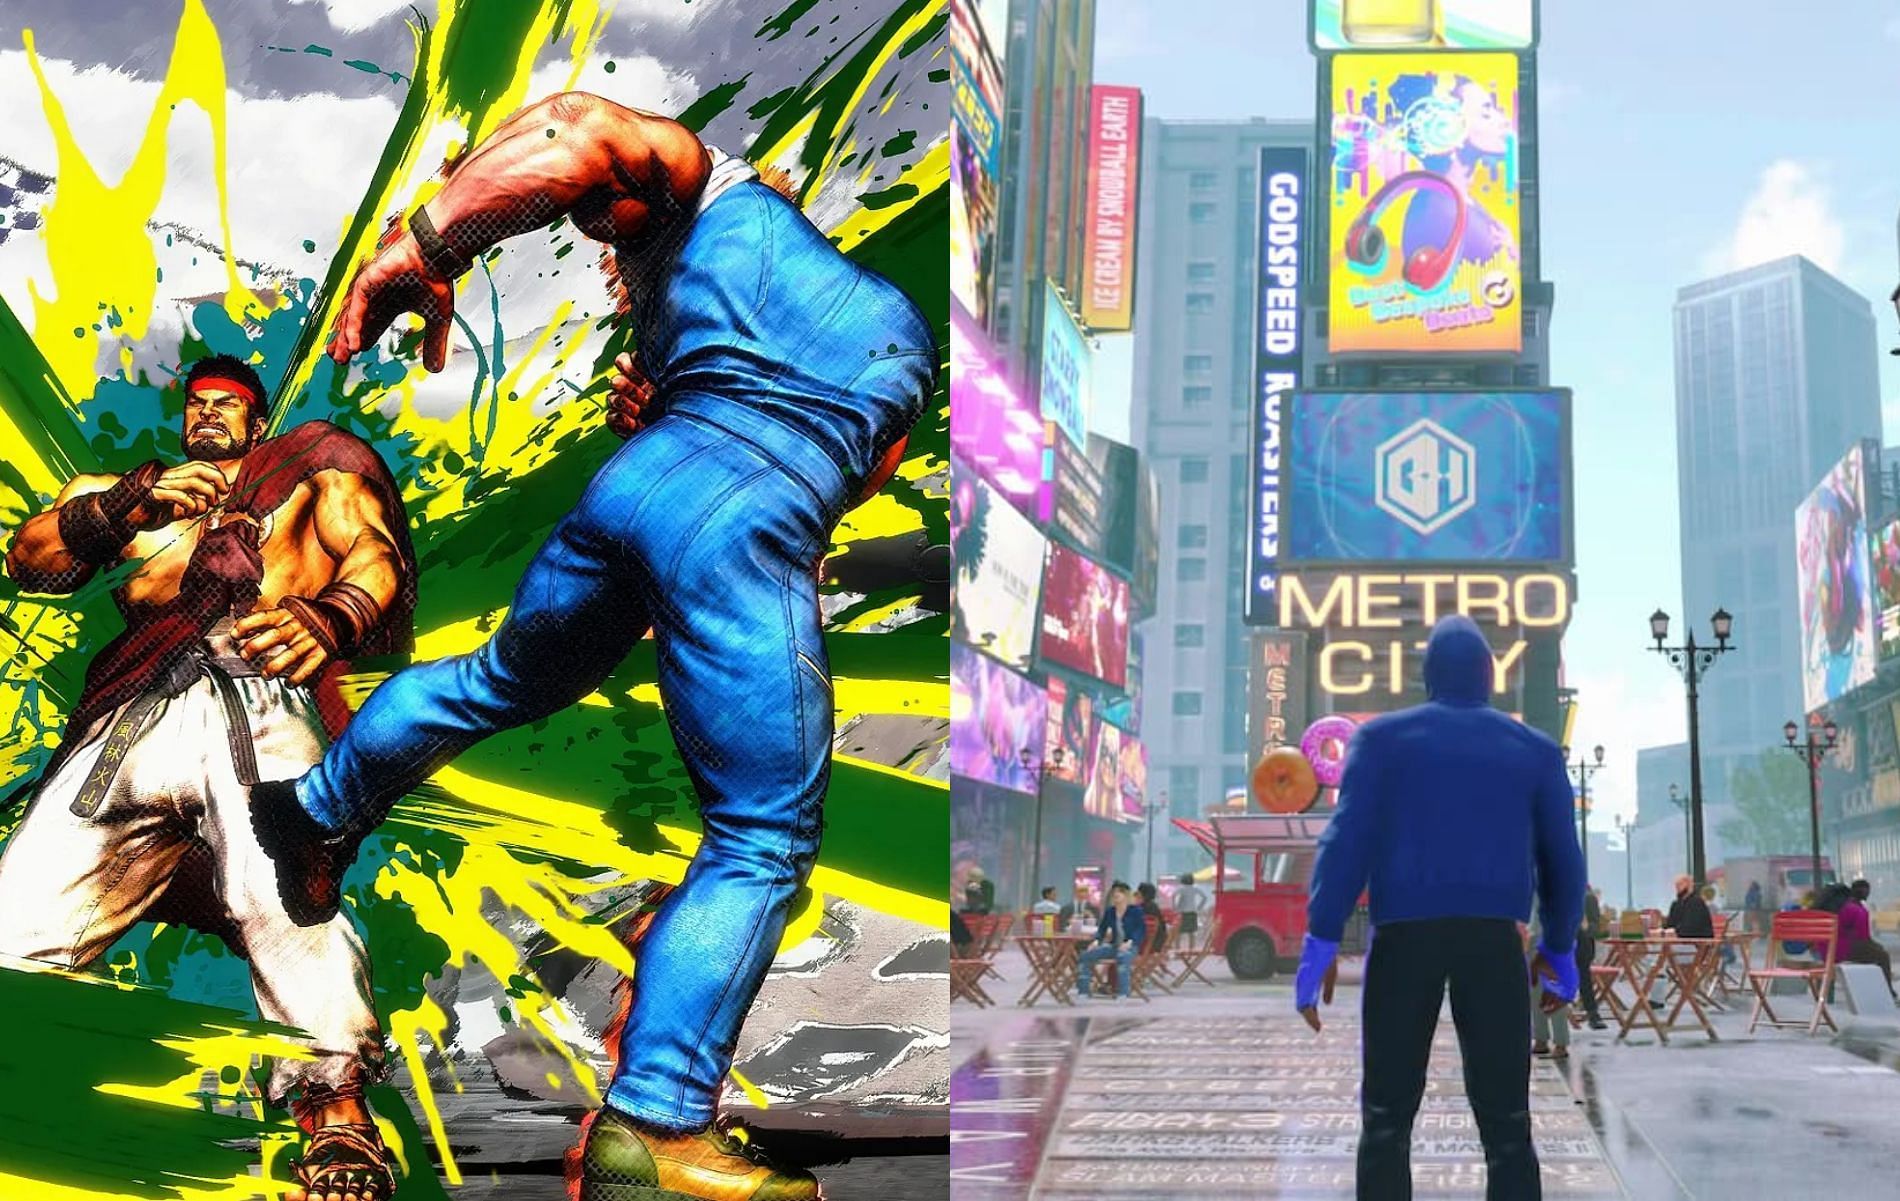 Get ready to explore Metro City and face its challenges in the single-player World Tour mode (Images via Capcom)